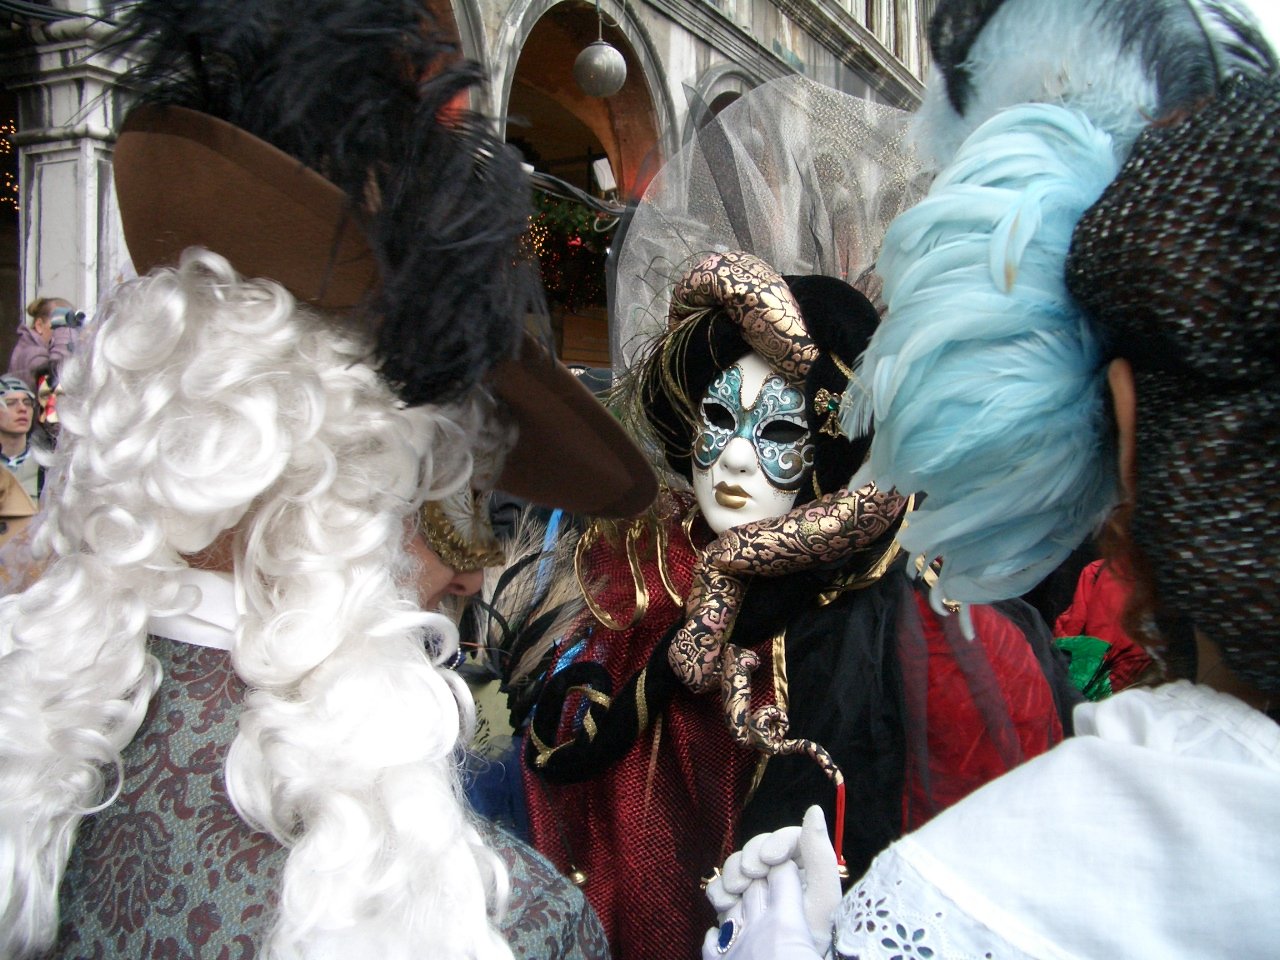 a person wearing a face mask is surrounded by wigs